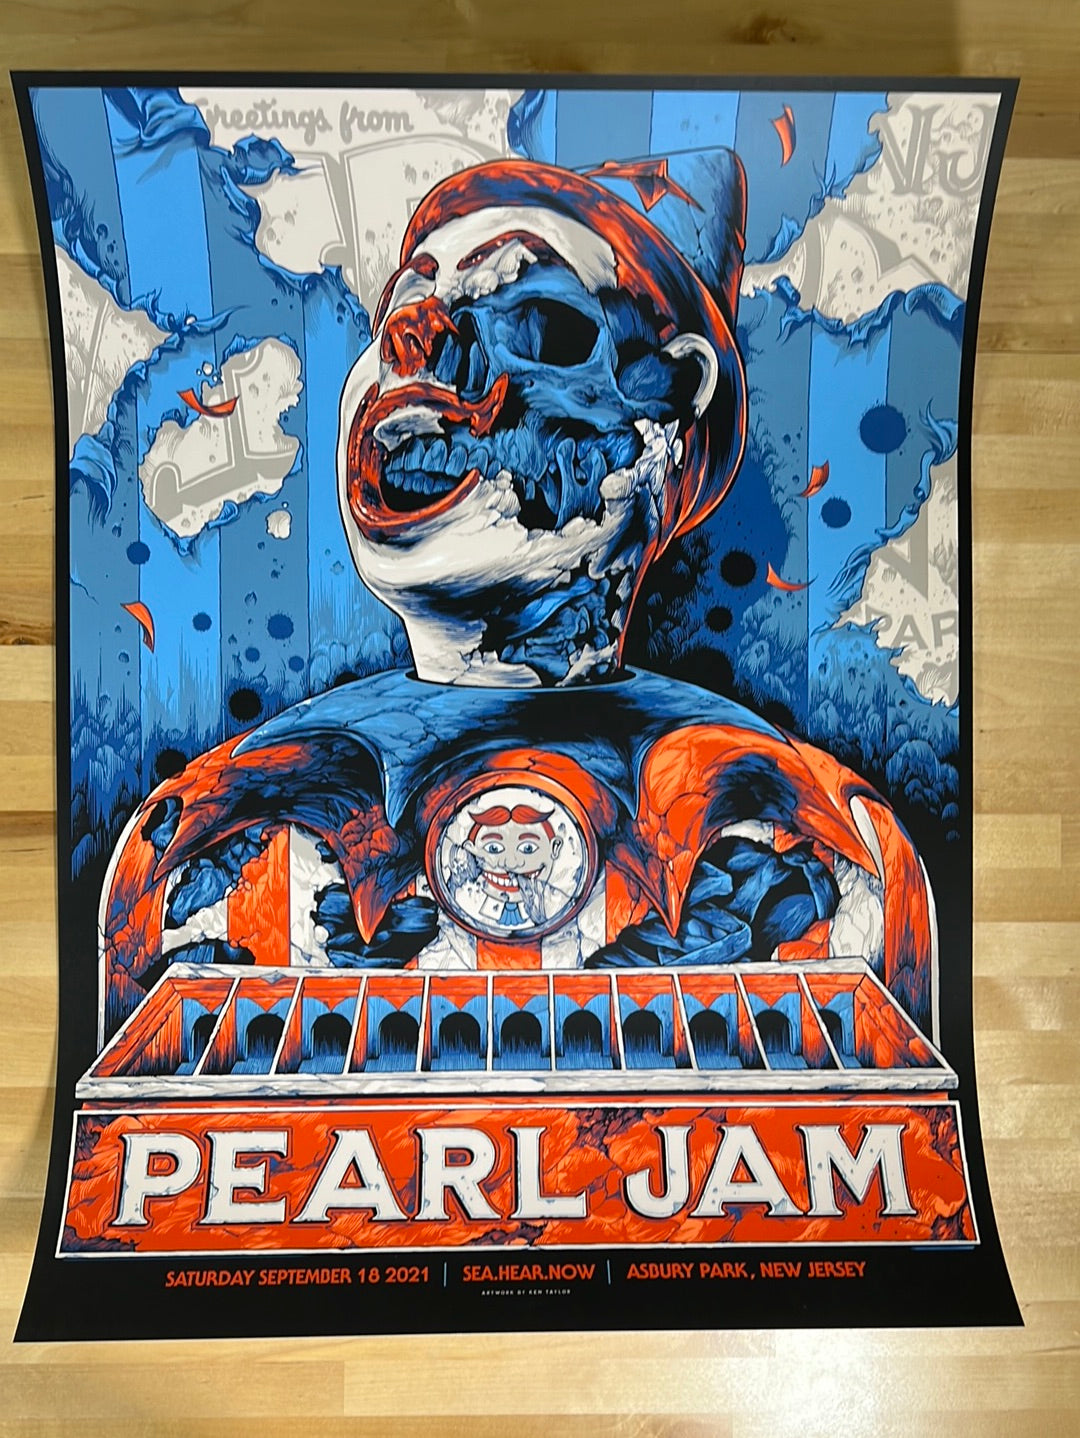 Pearl Jam in Posters: A Gallery of Illustrated Tour Art